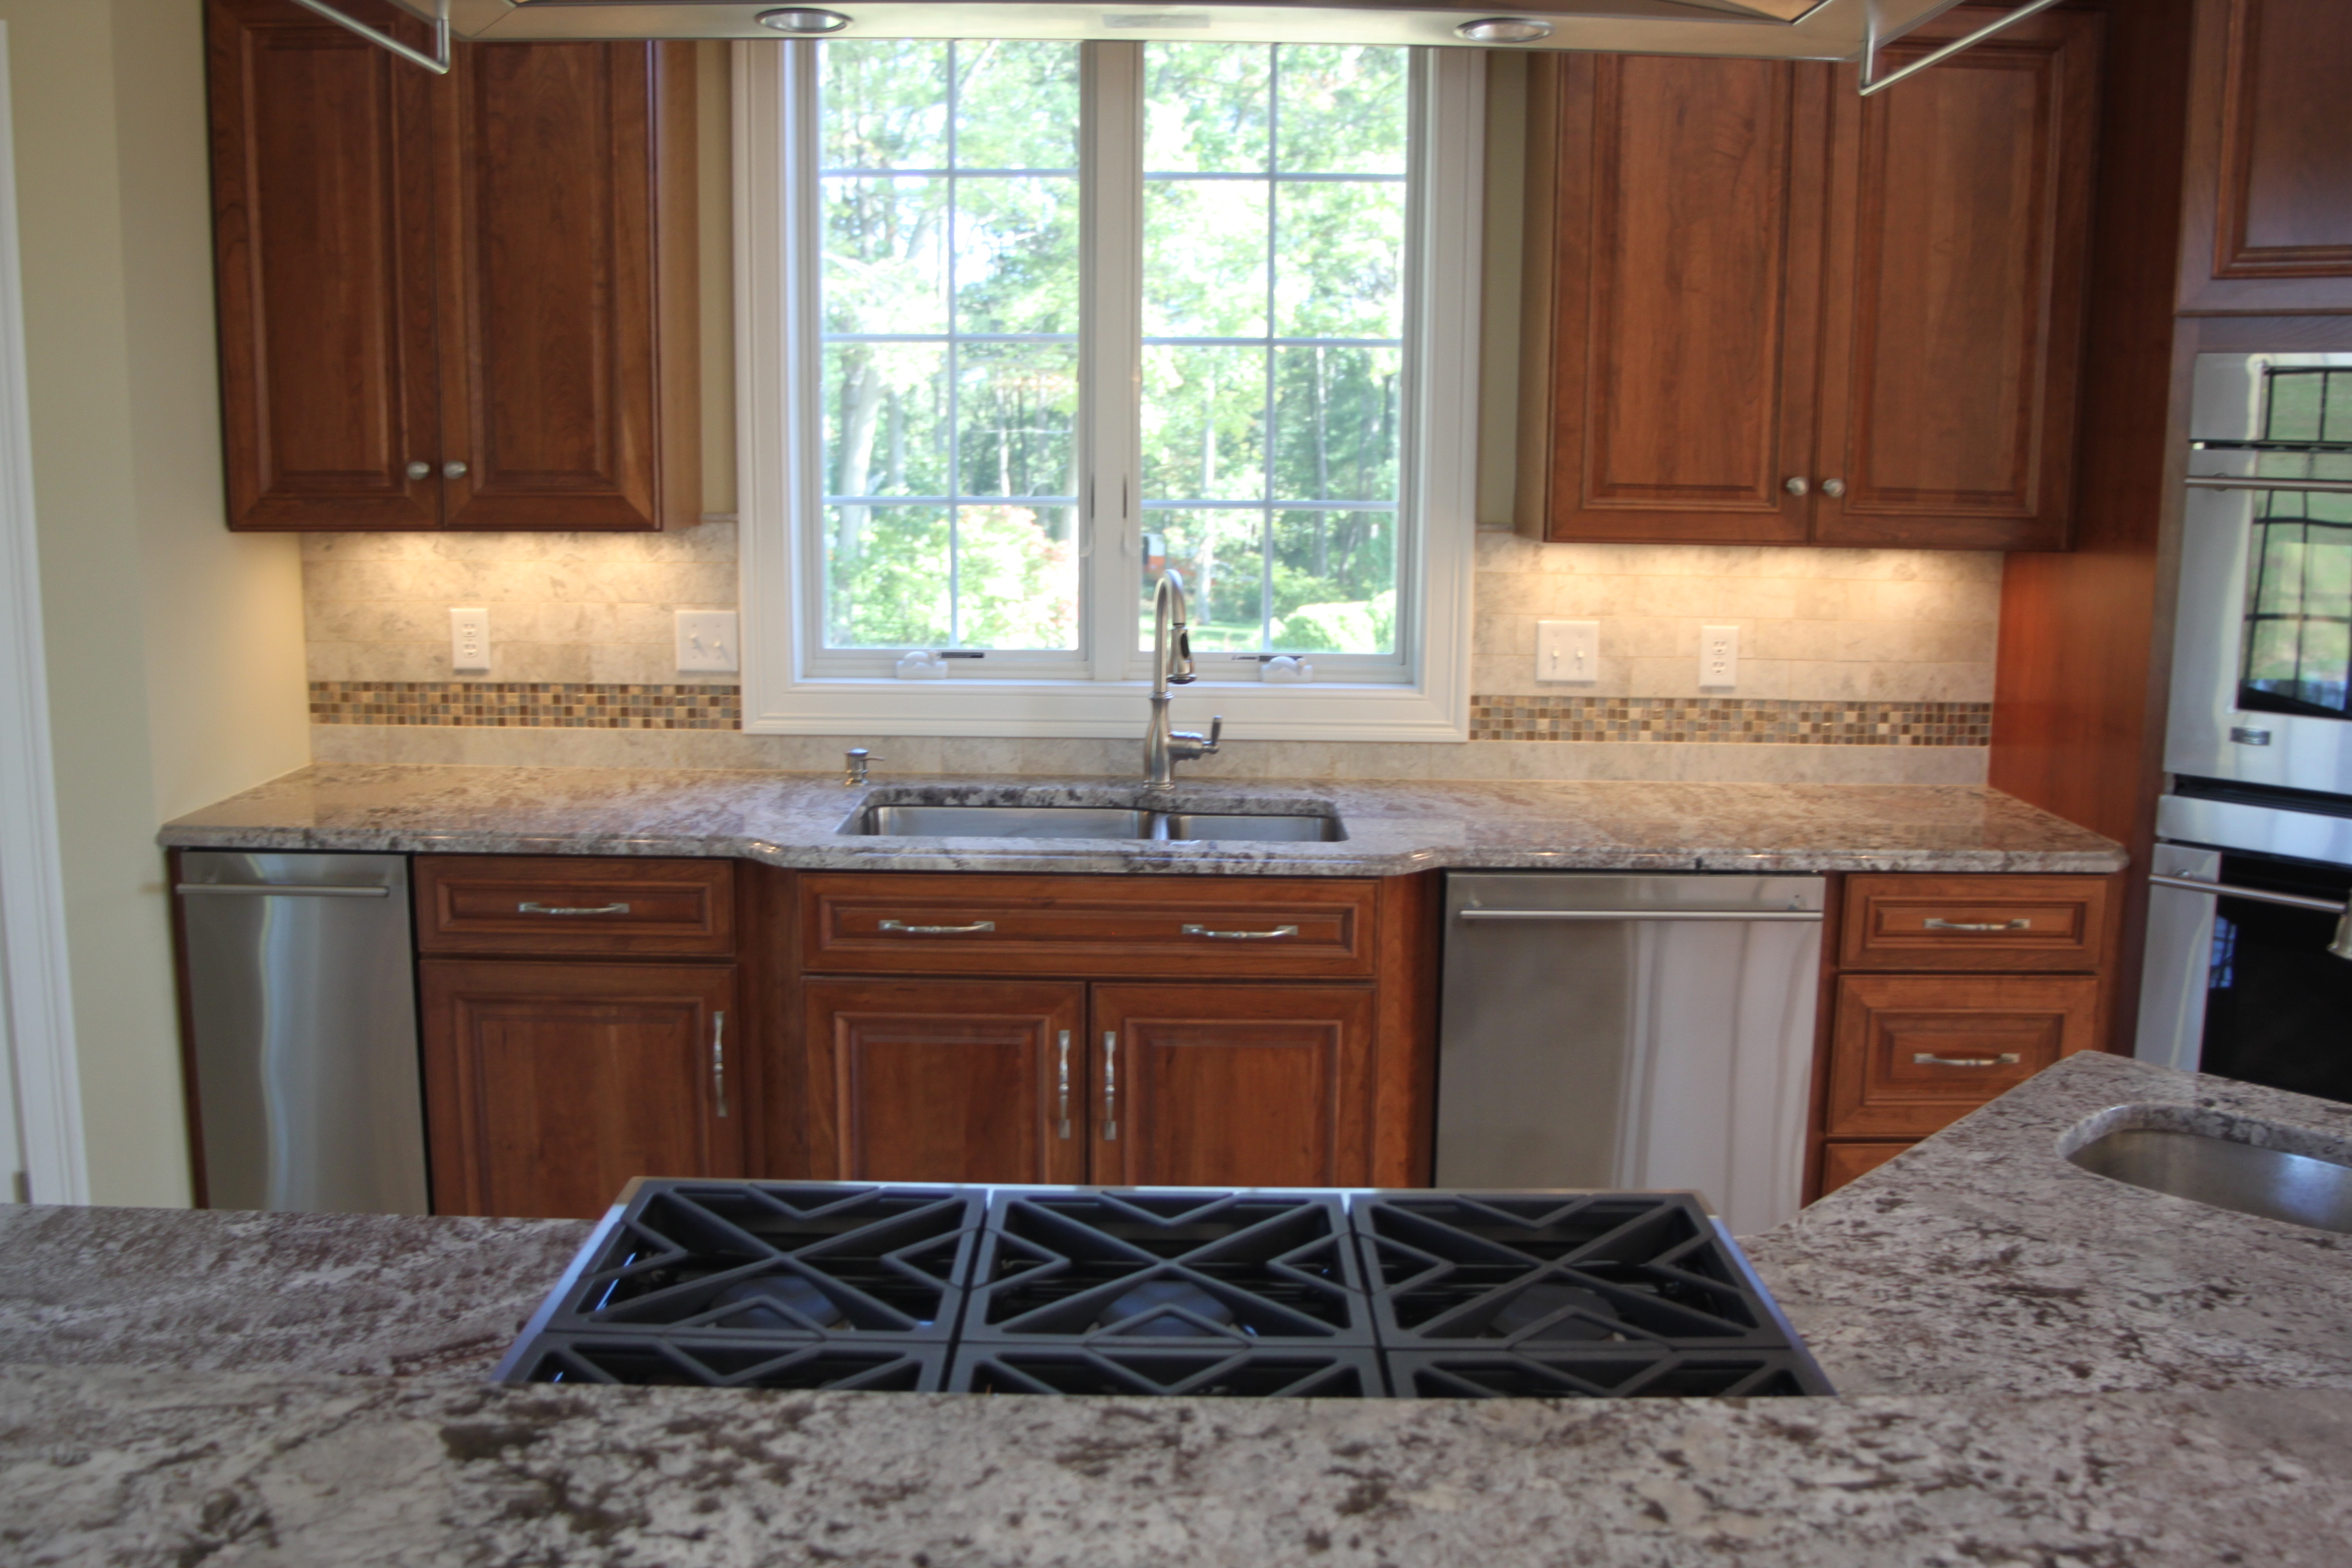 Matching Countertops To Cabinets Dalene Flooring within proportions 3456 X 2304